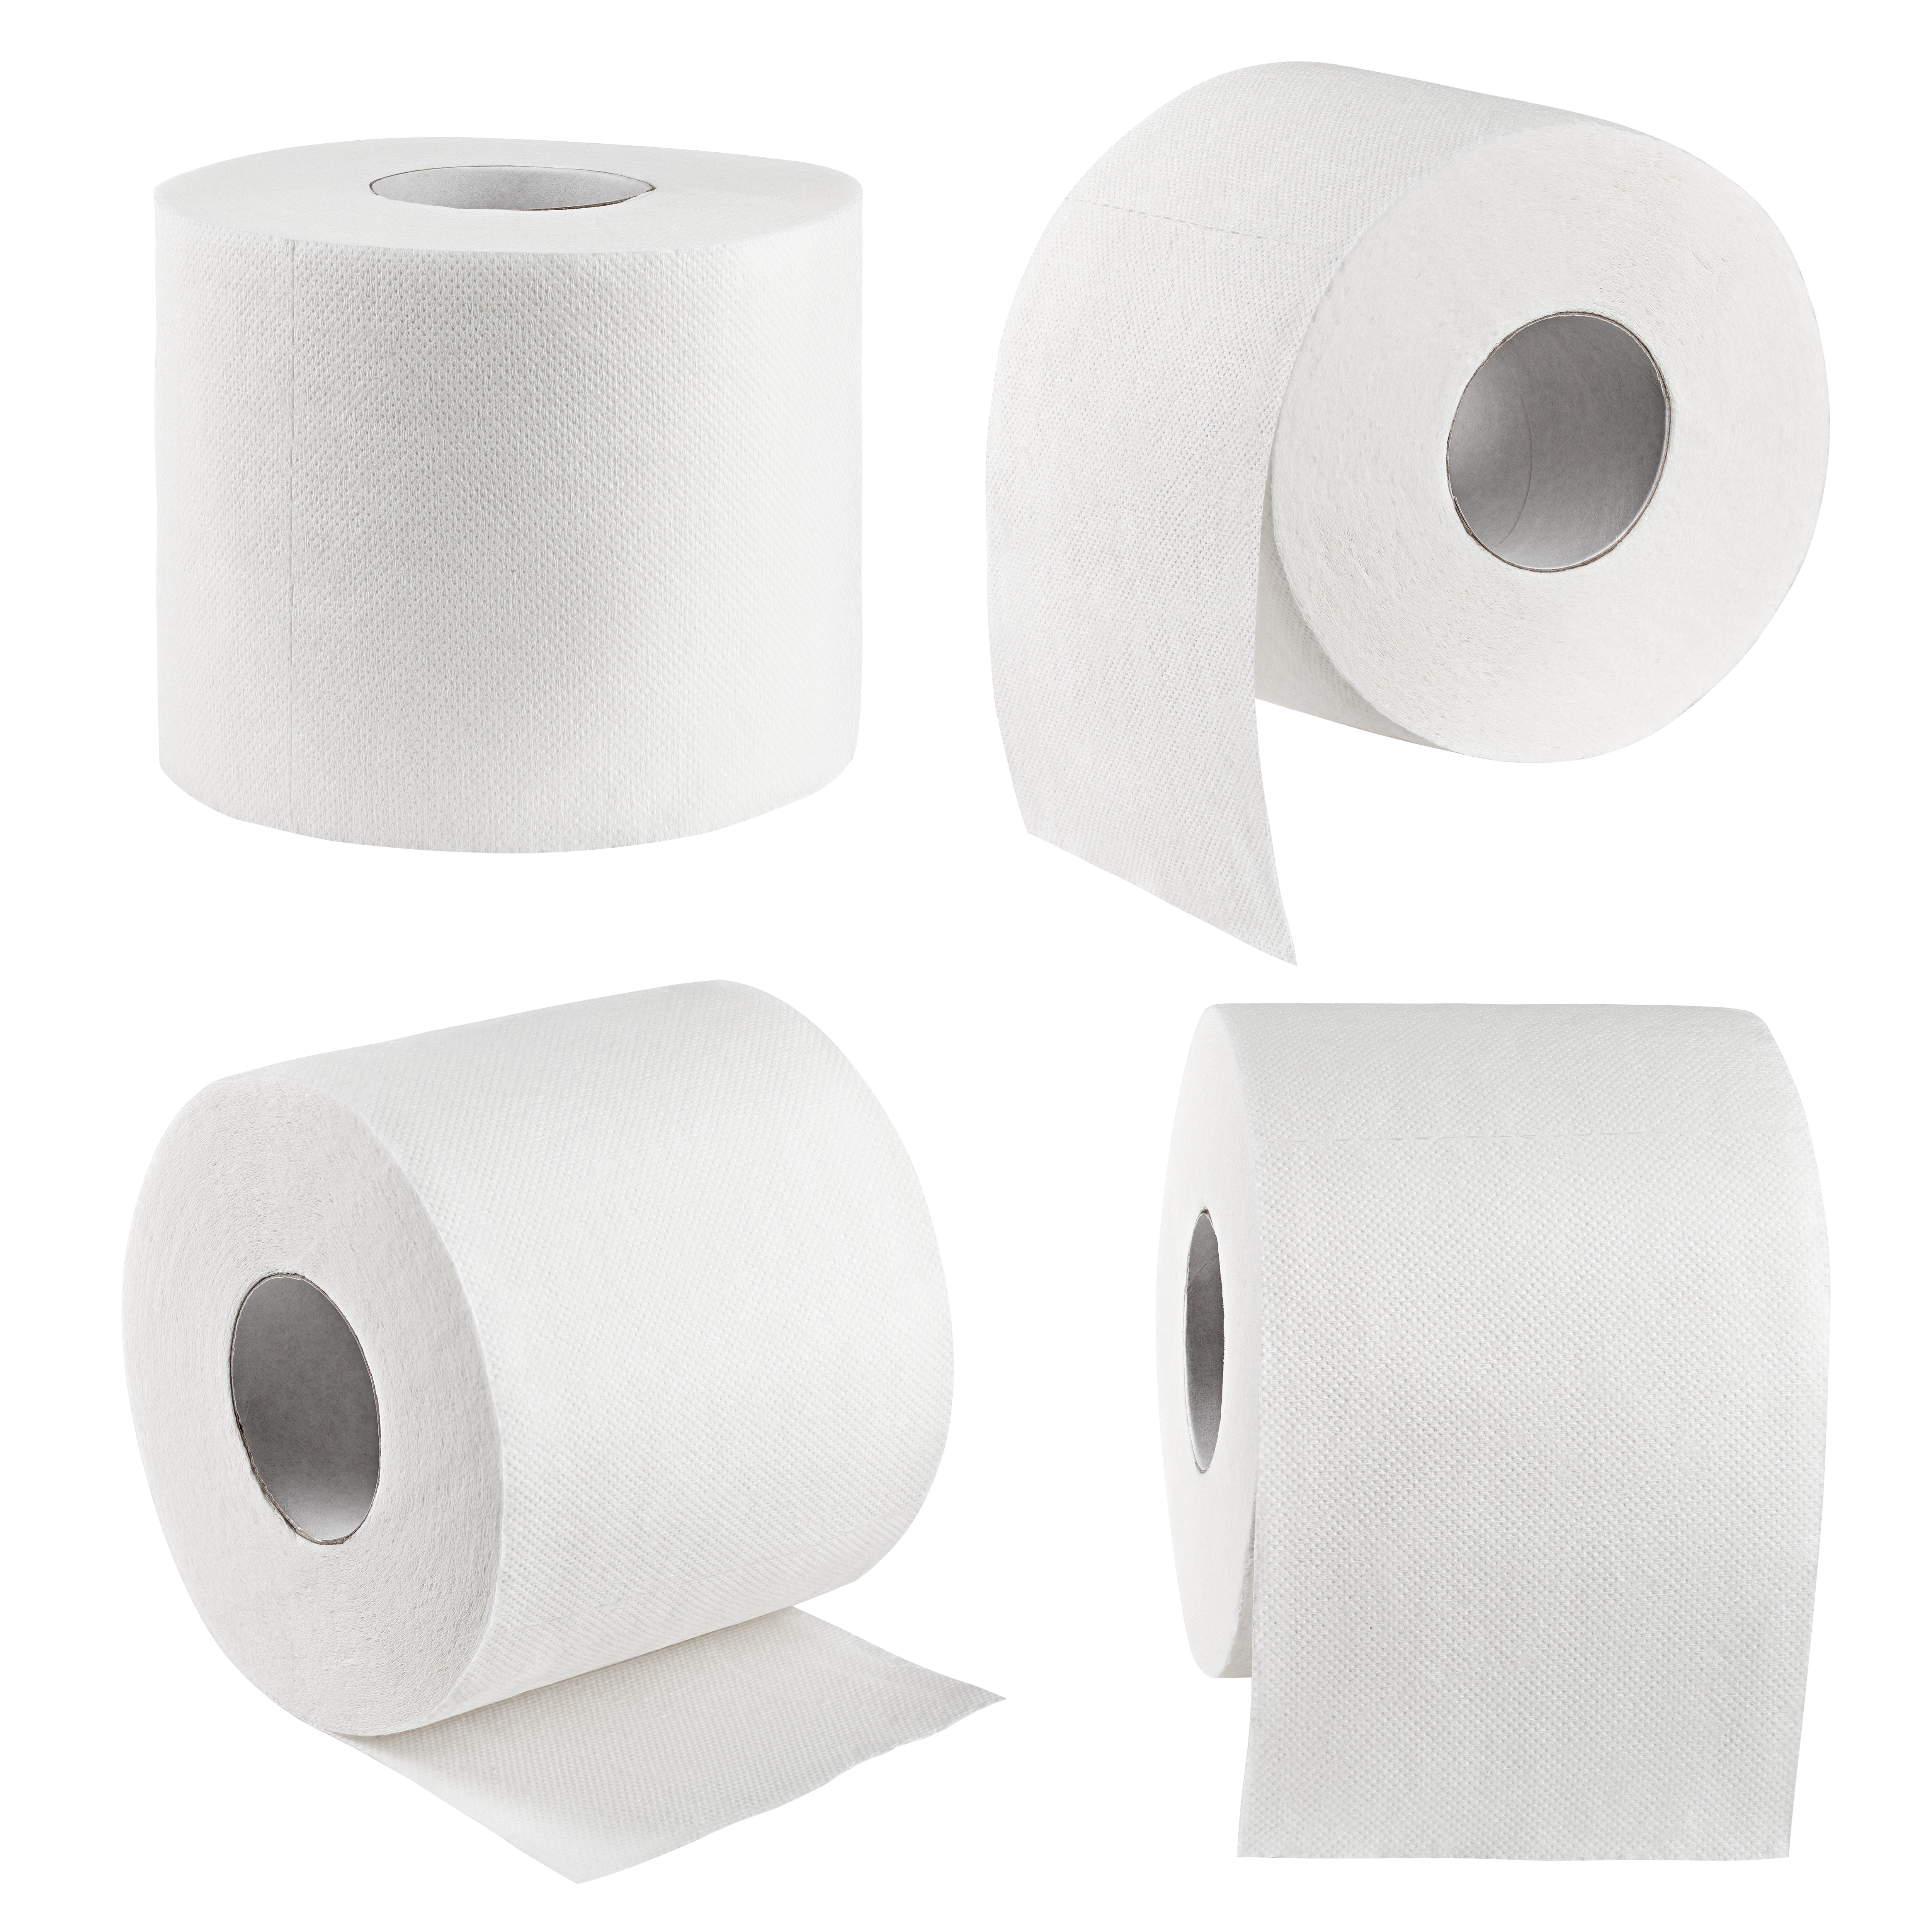 Recycled toilet rolls x4, made from UK recycled consumer and trade waste paper using chlorine-free processing